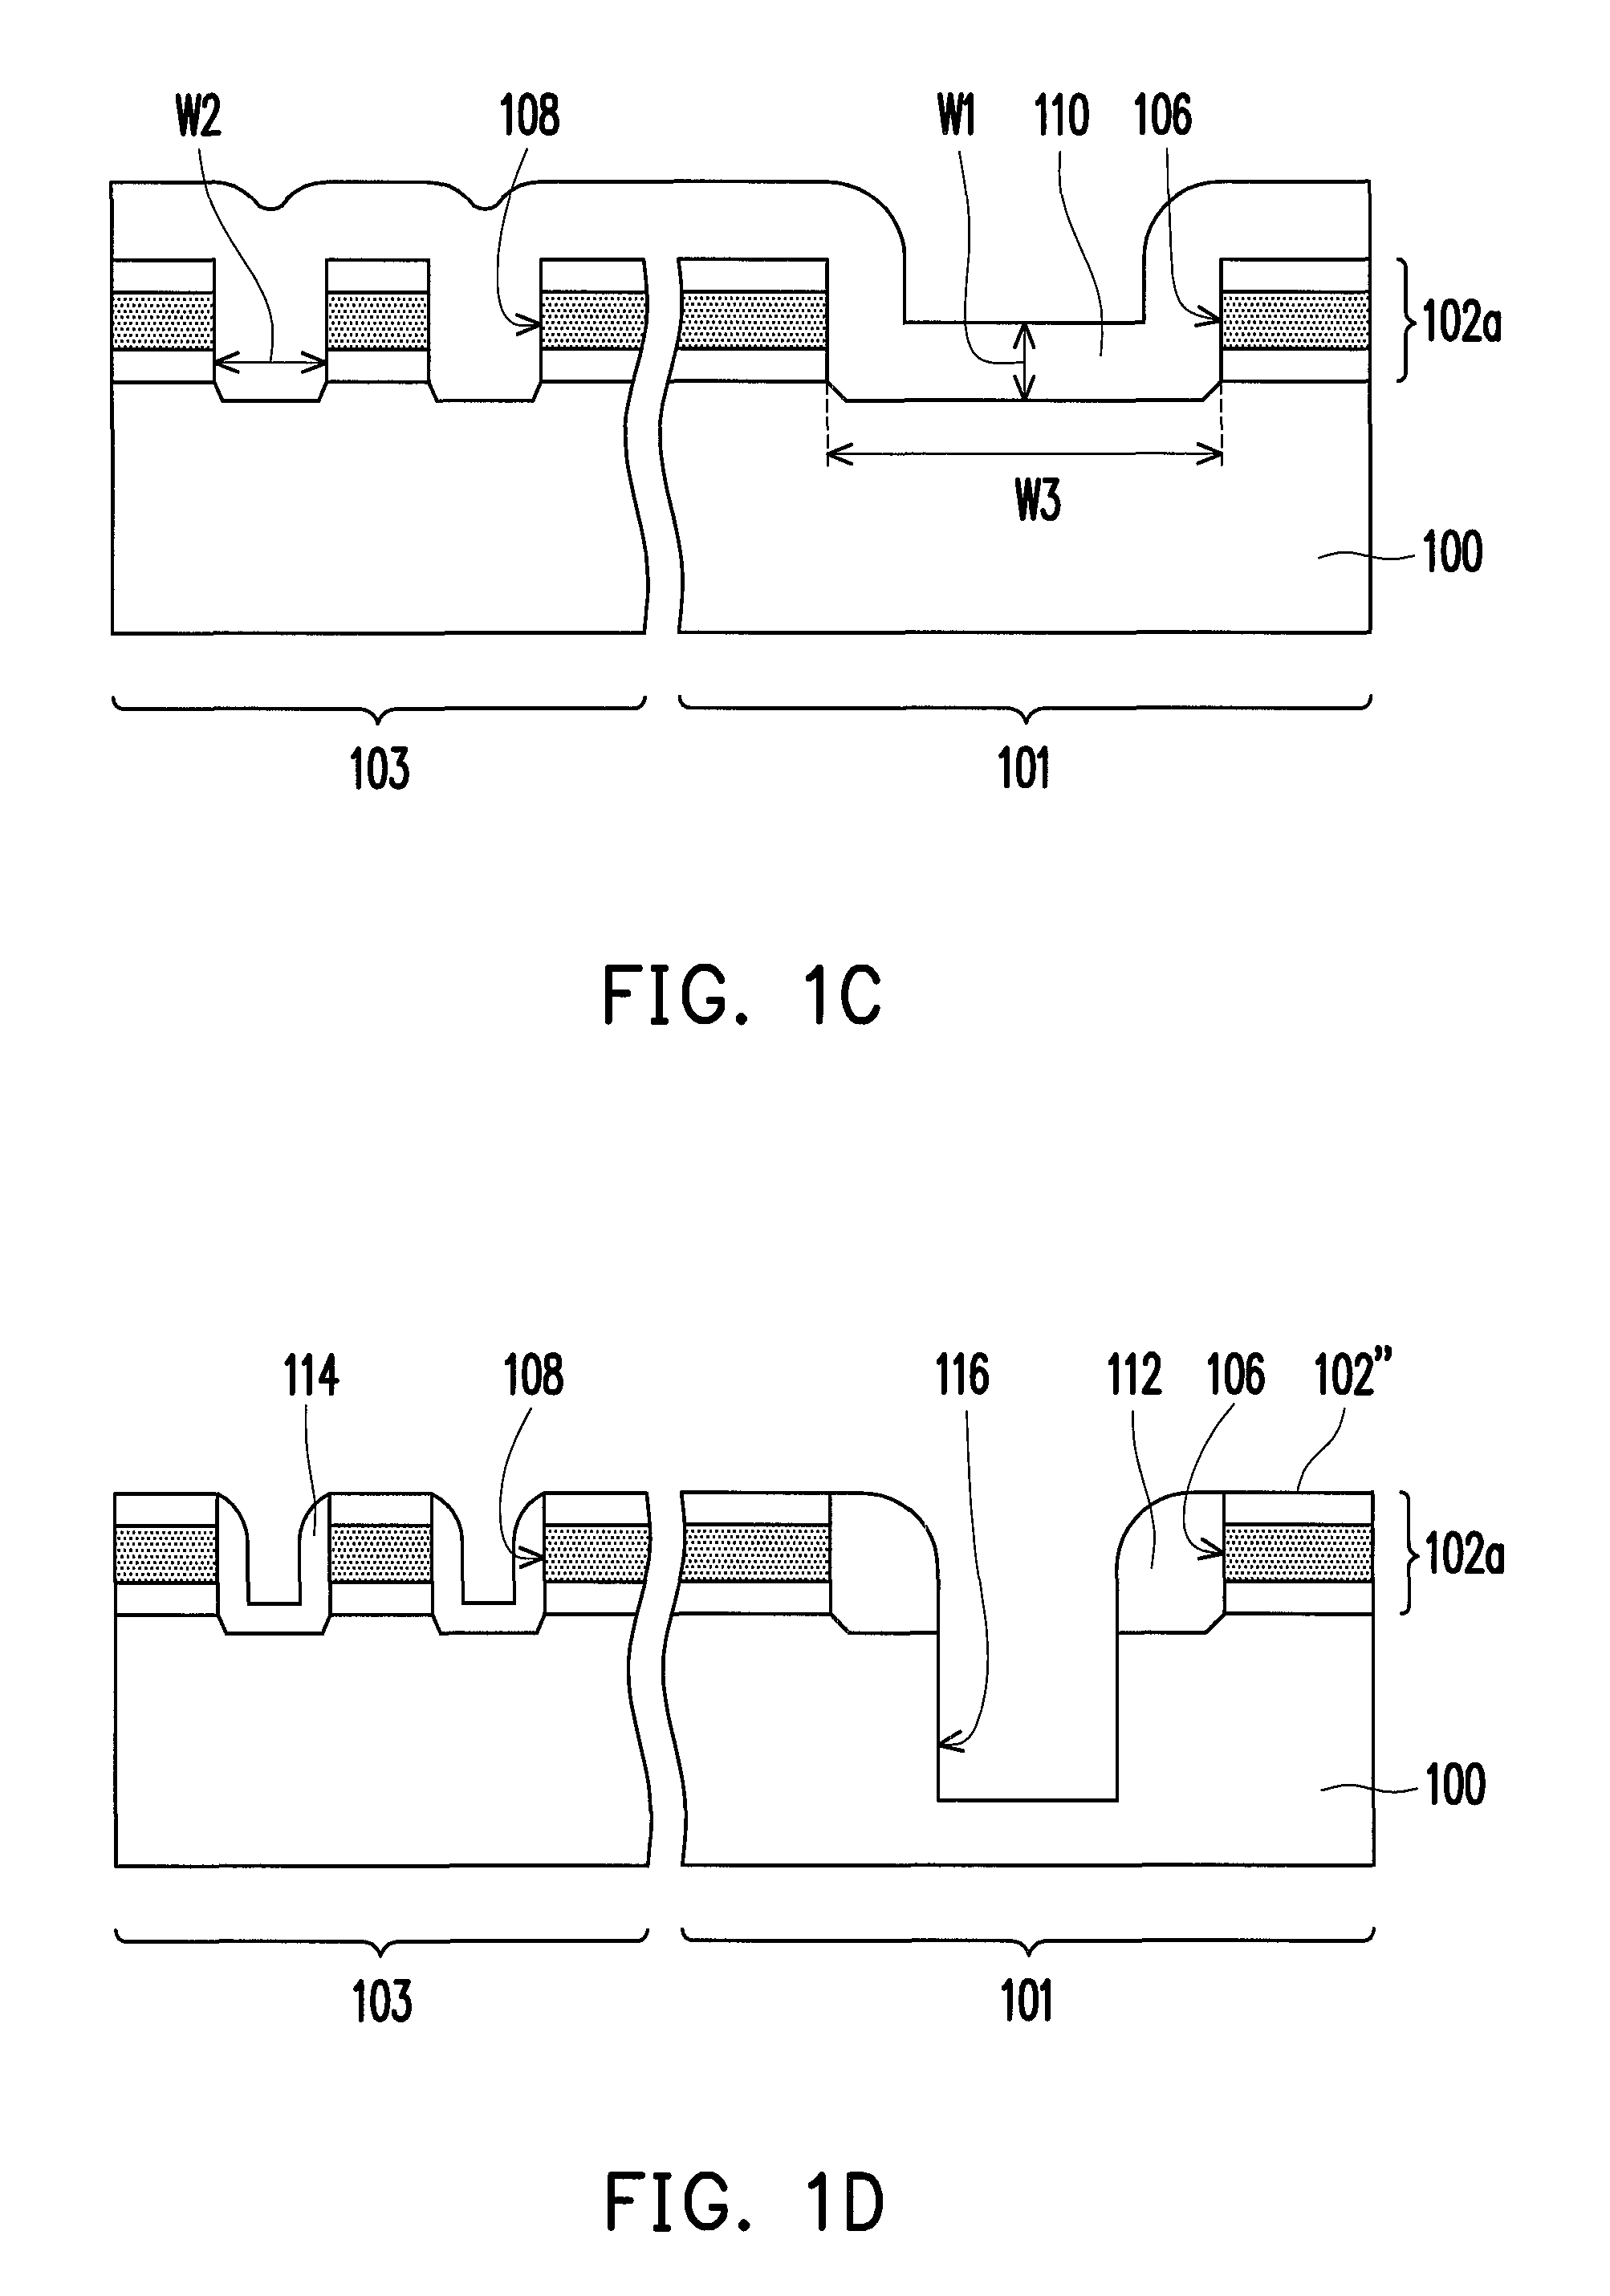 Methods of forming semiconductor trench and forming dual trenches, and structure for isolating devices